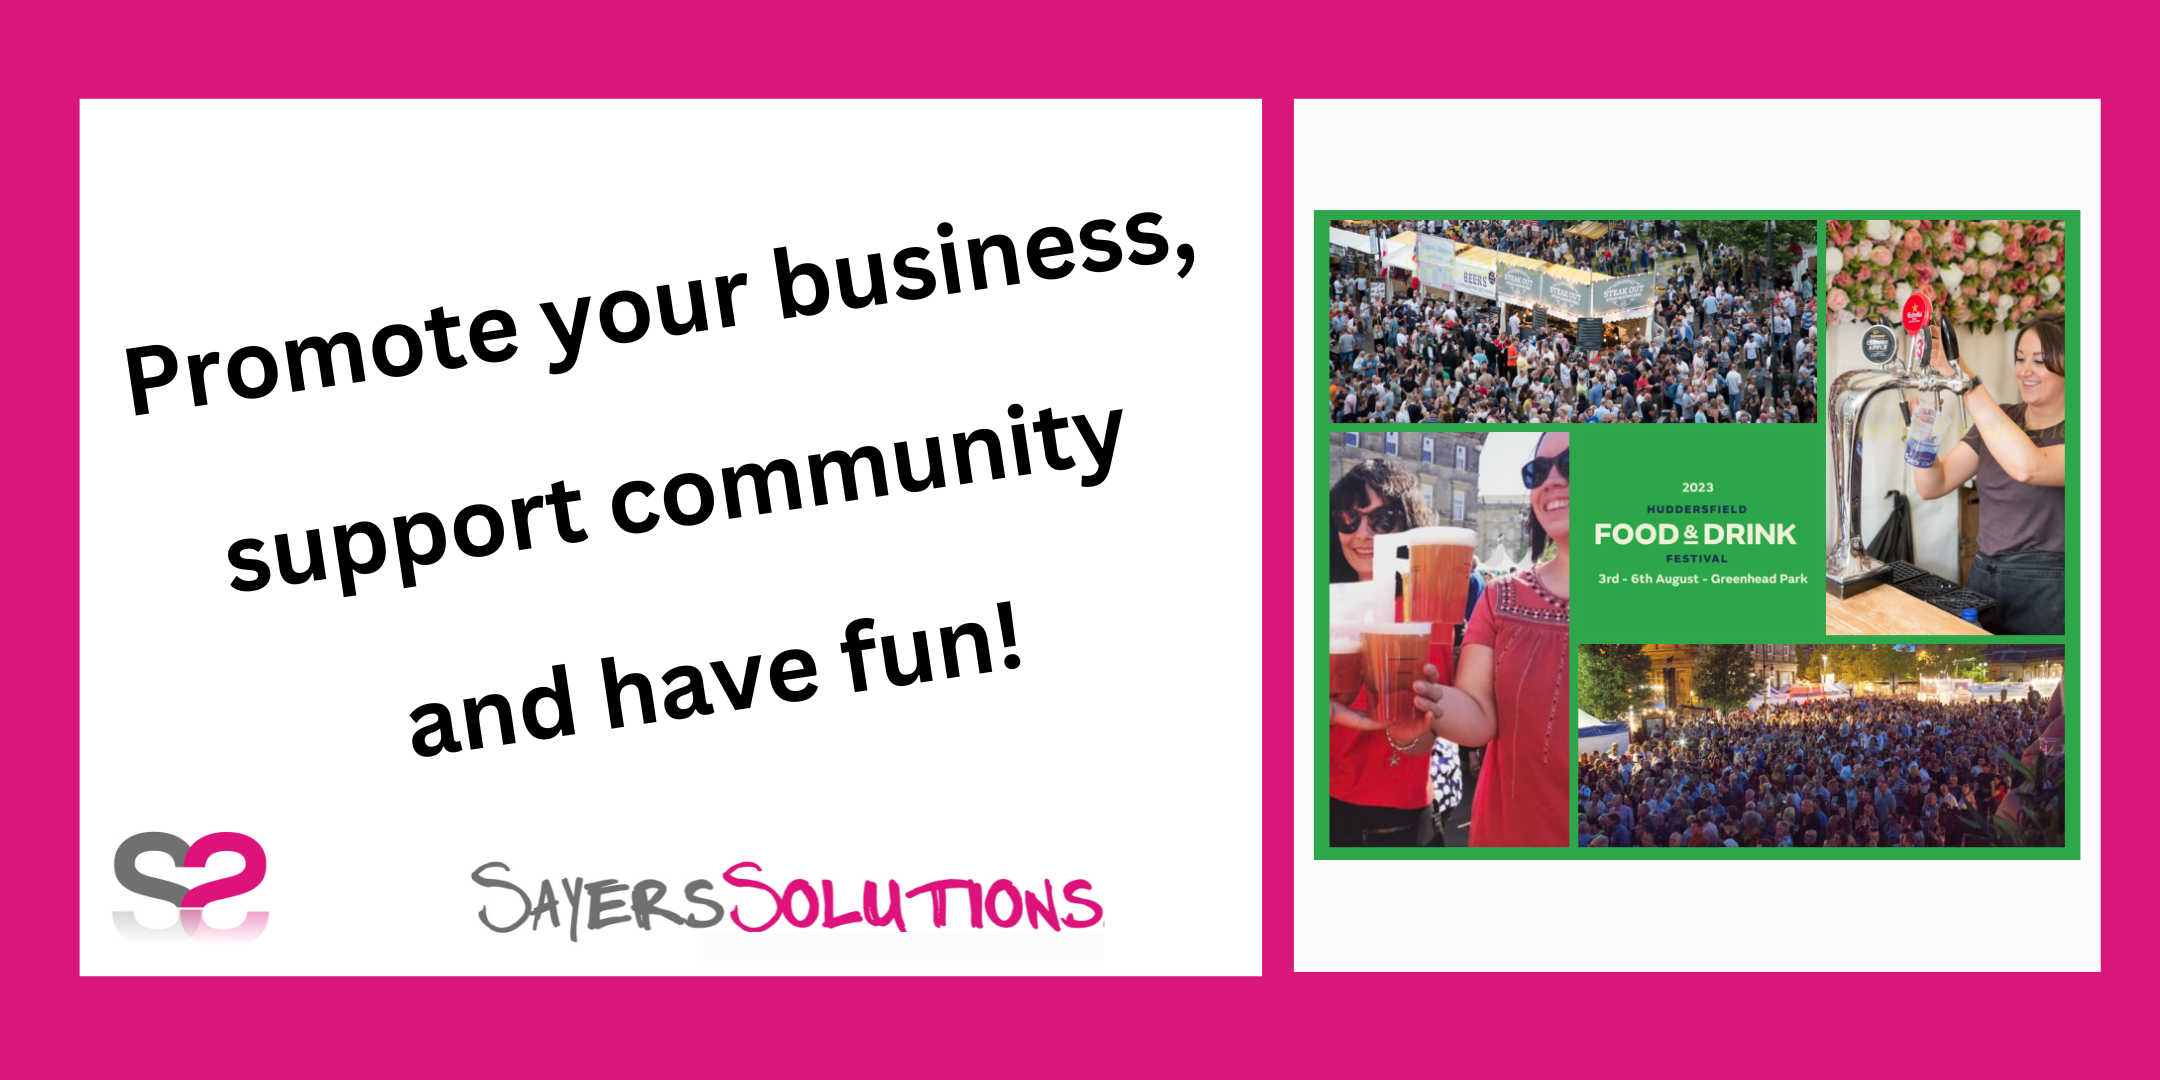 Promote your business, support community and have fun!